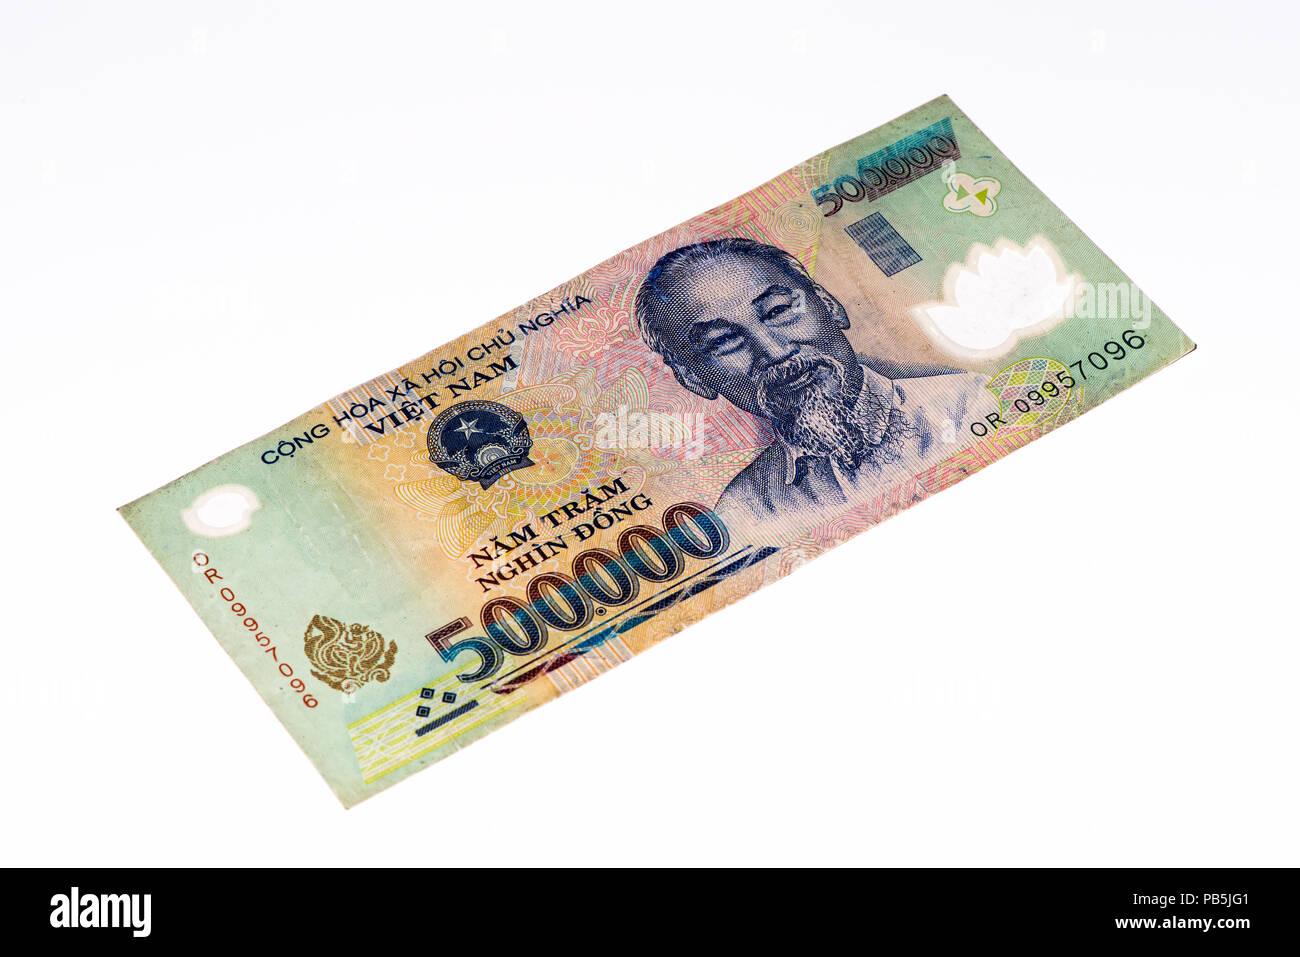 500000 dong bank note of Vietnam. Dong is the national currency of Vietnam Stock Photo